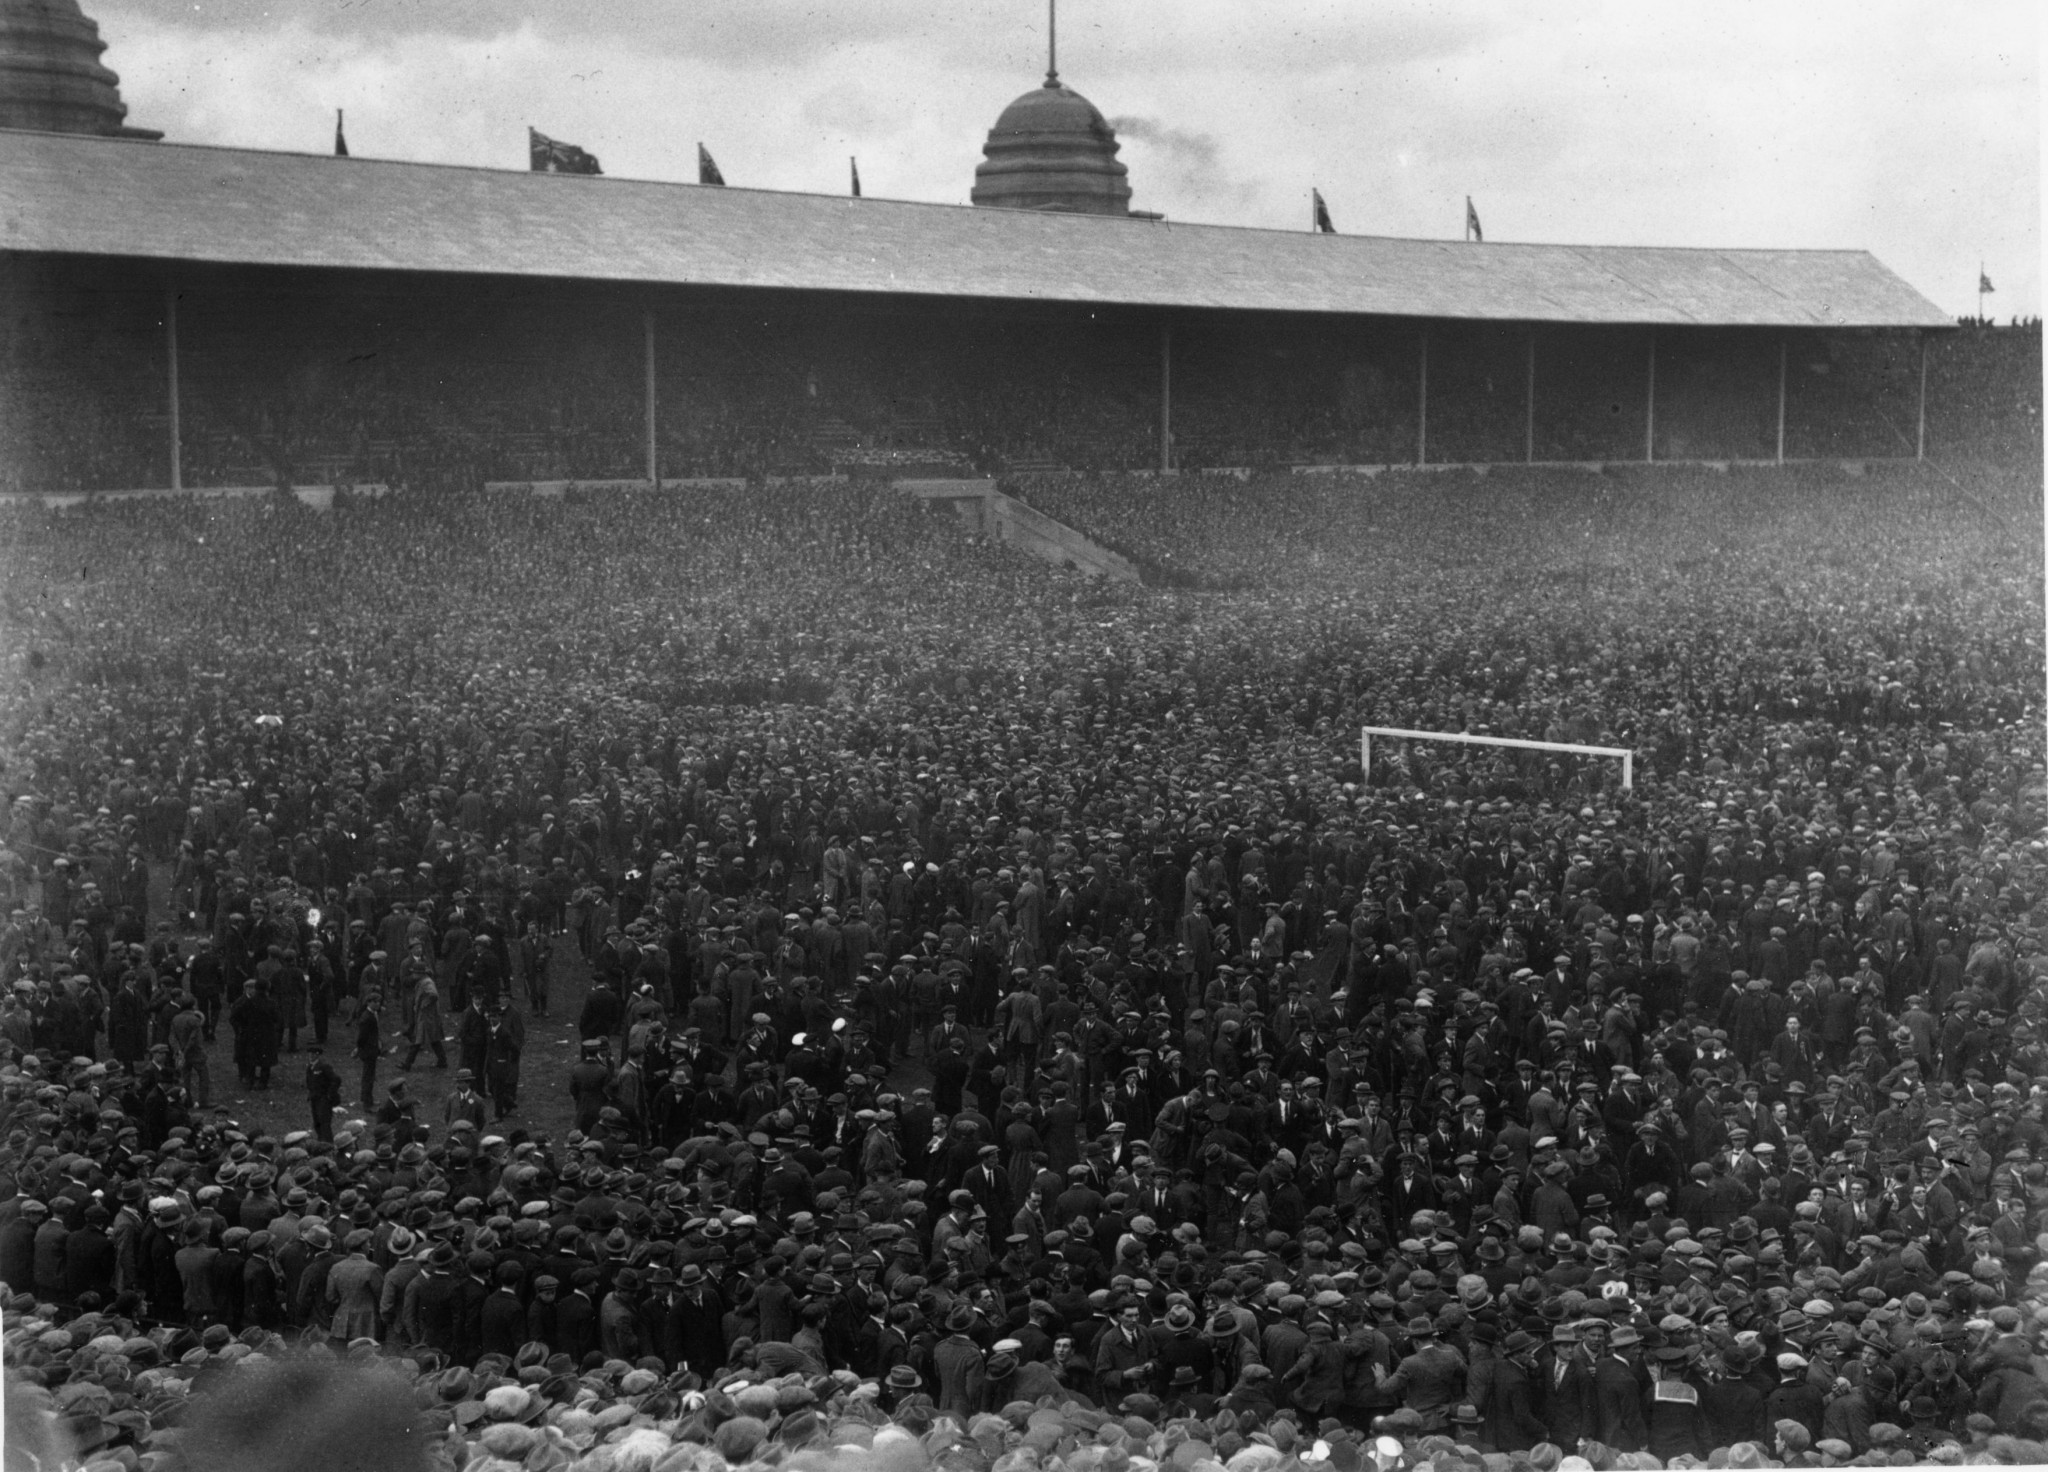 The scene at Wembley before police horses cleared the field at the 1923 FA Cup Final ©Getty Images